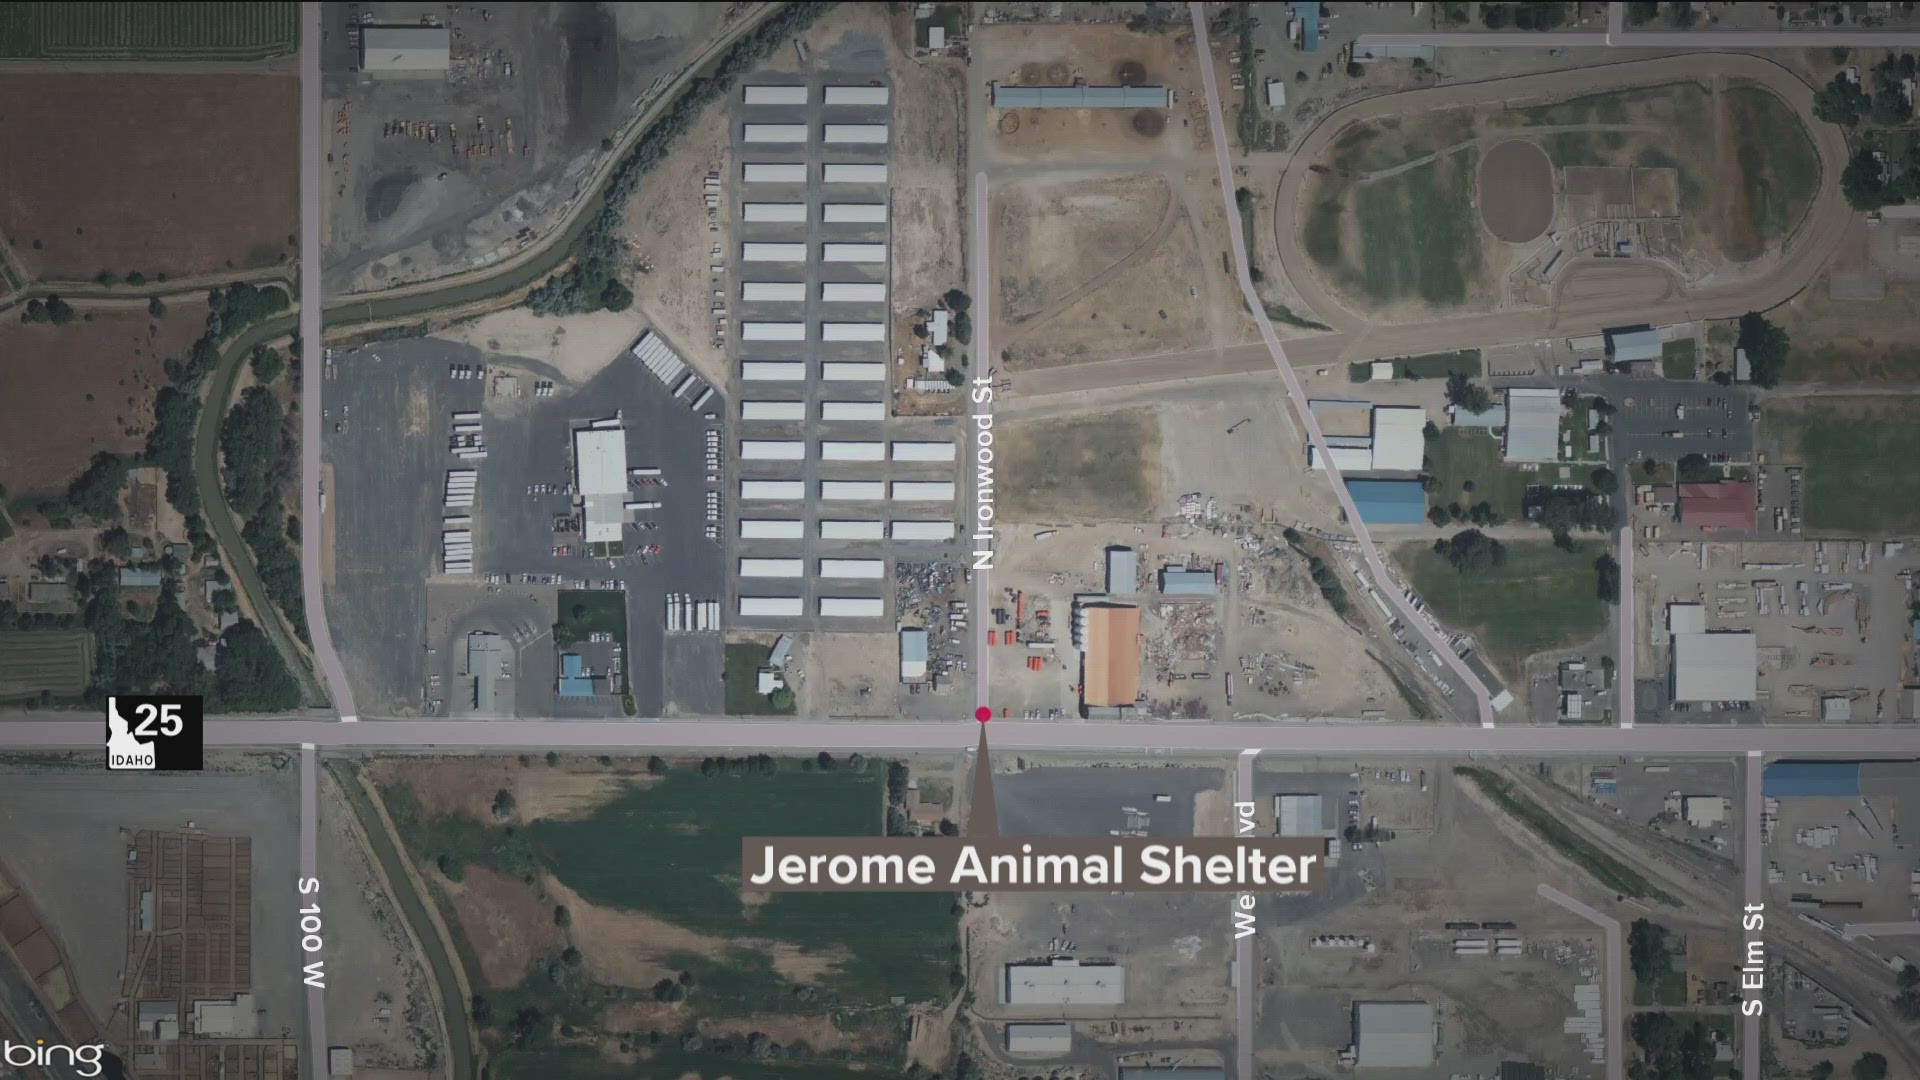 Police say Michael Underwood's body was found in a local canal near the Jerome Animal Shelter.